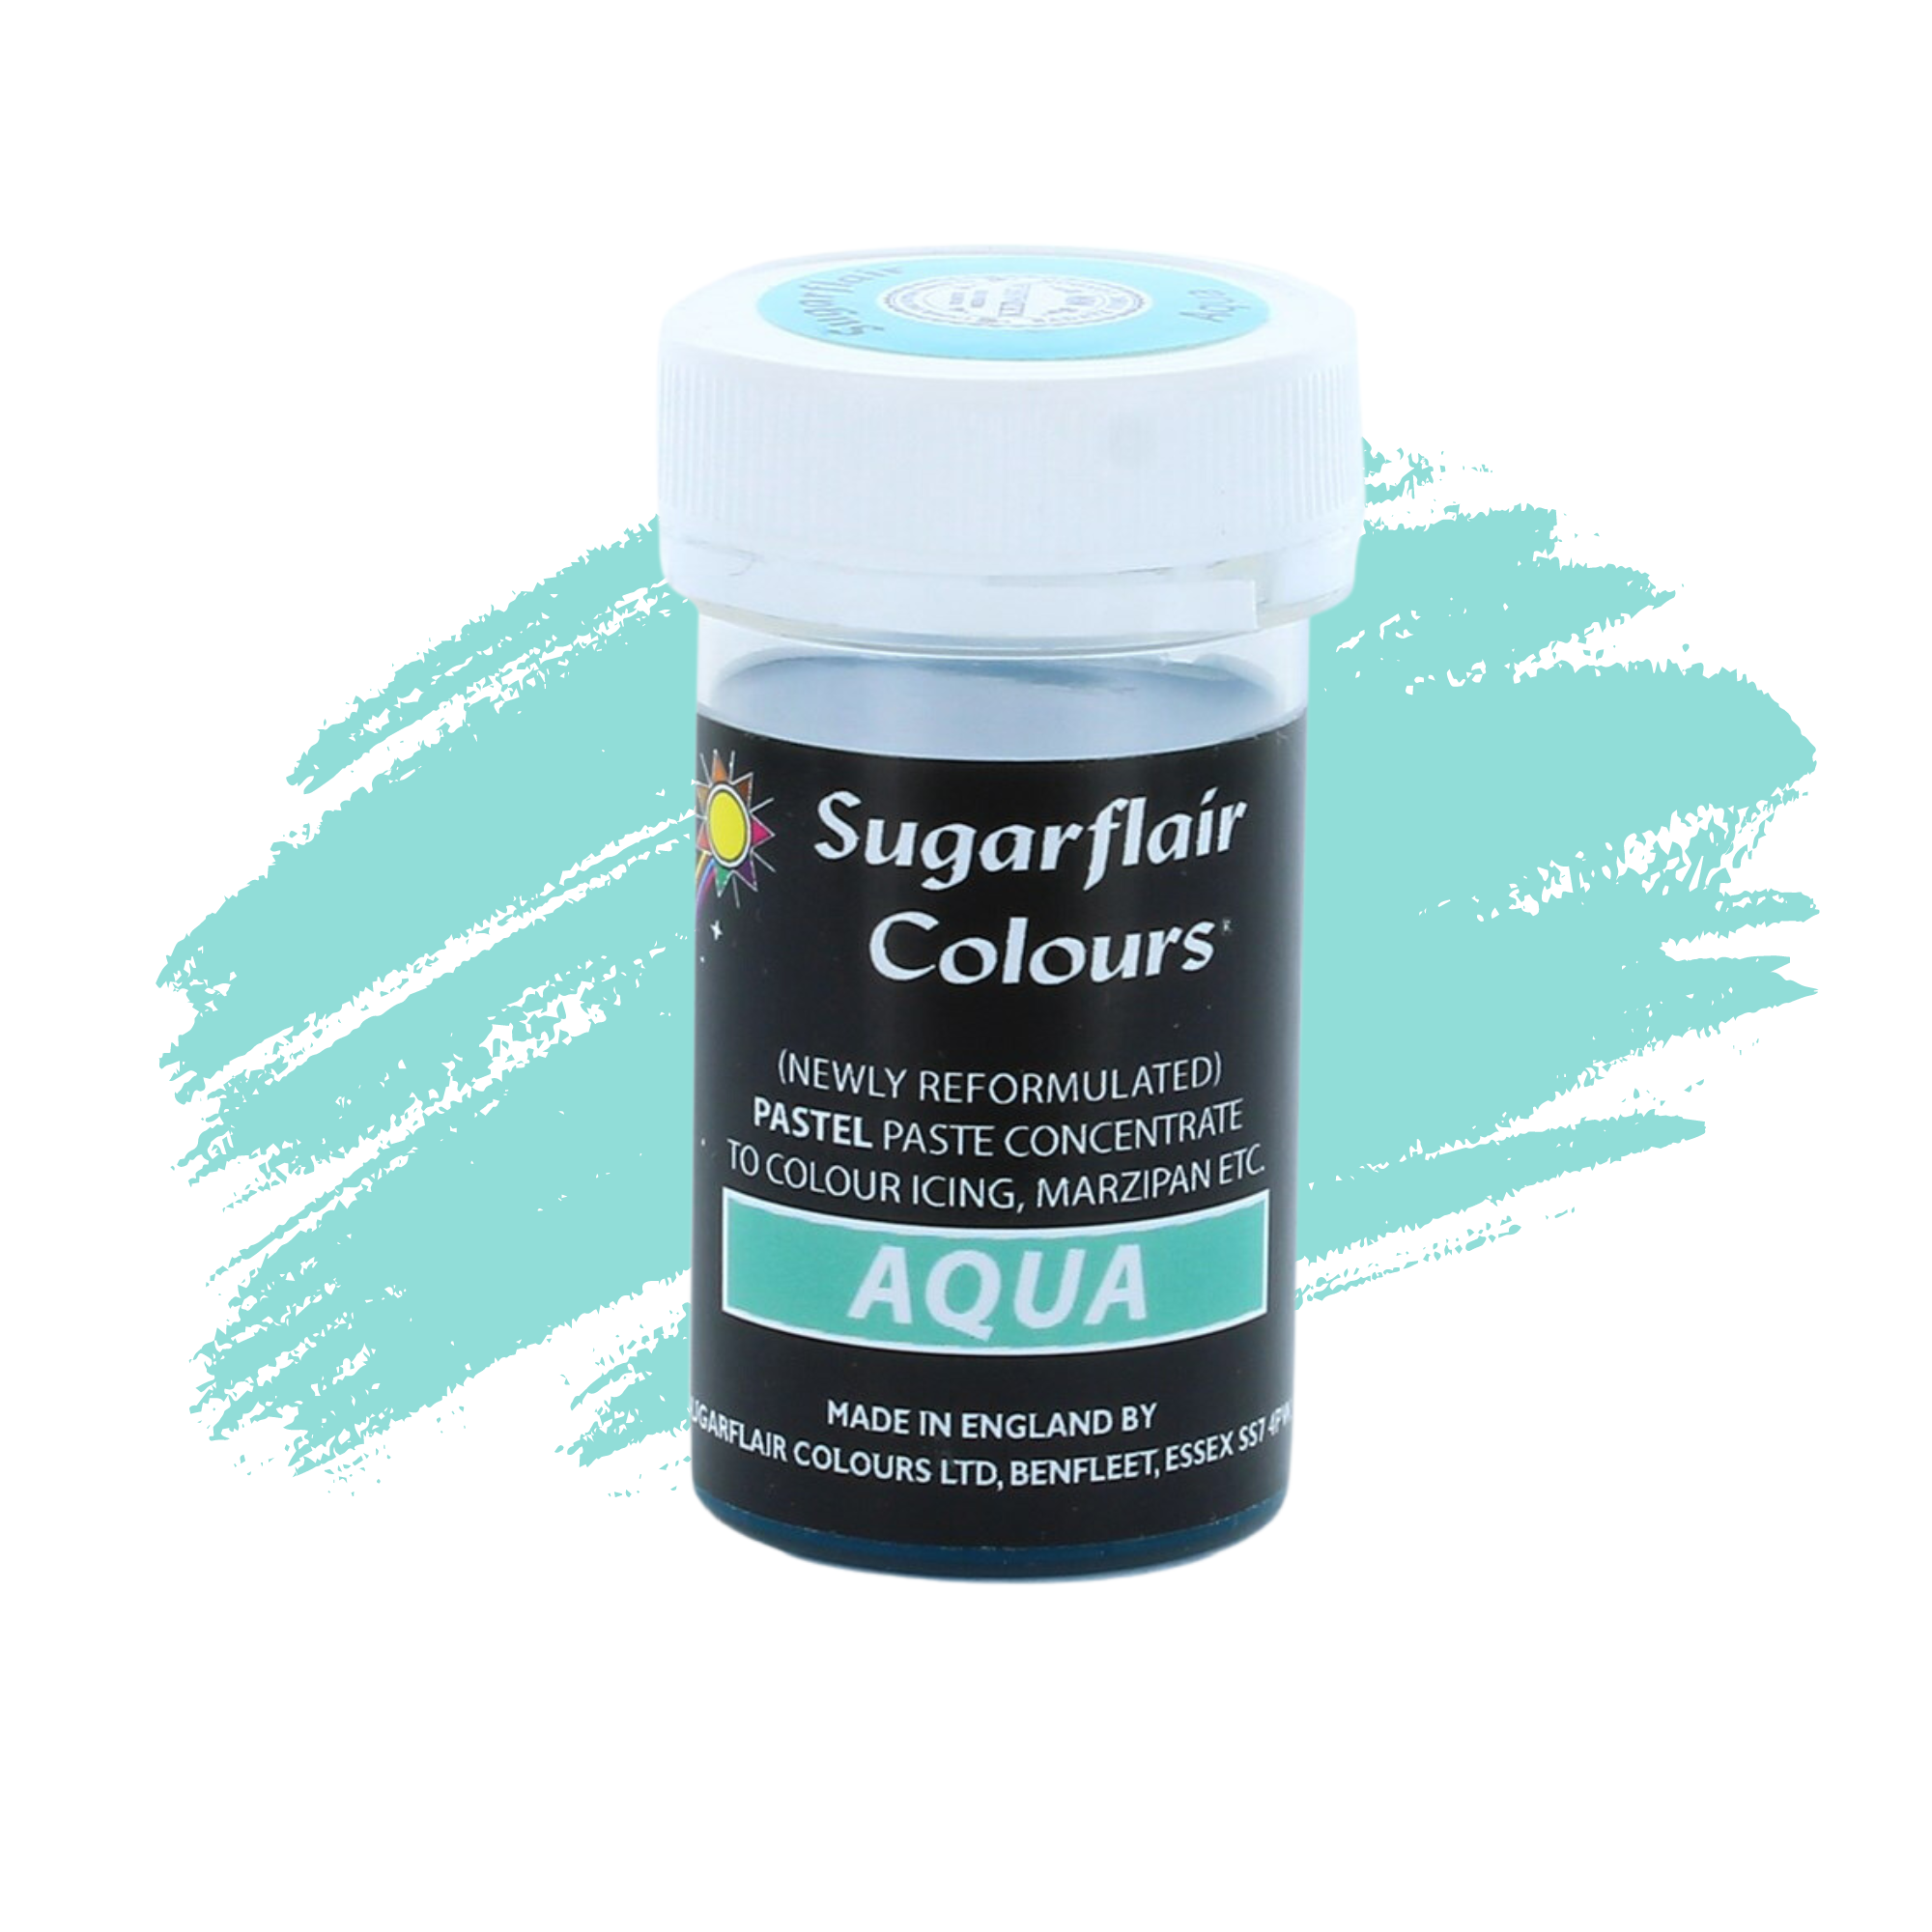 Sugarflair Paste Colours Concentrated Food Colouring - Pastel Aqua - 25g